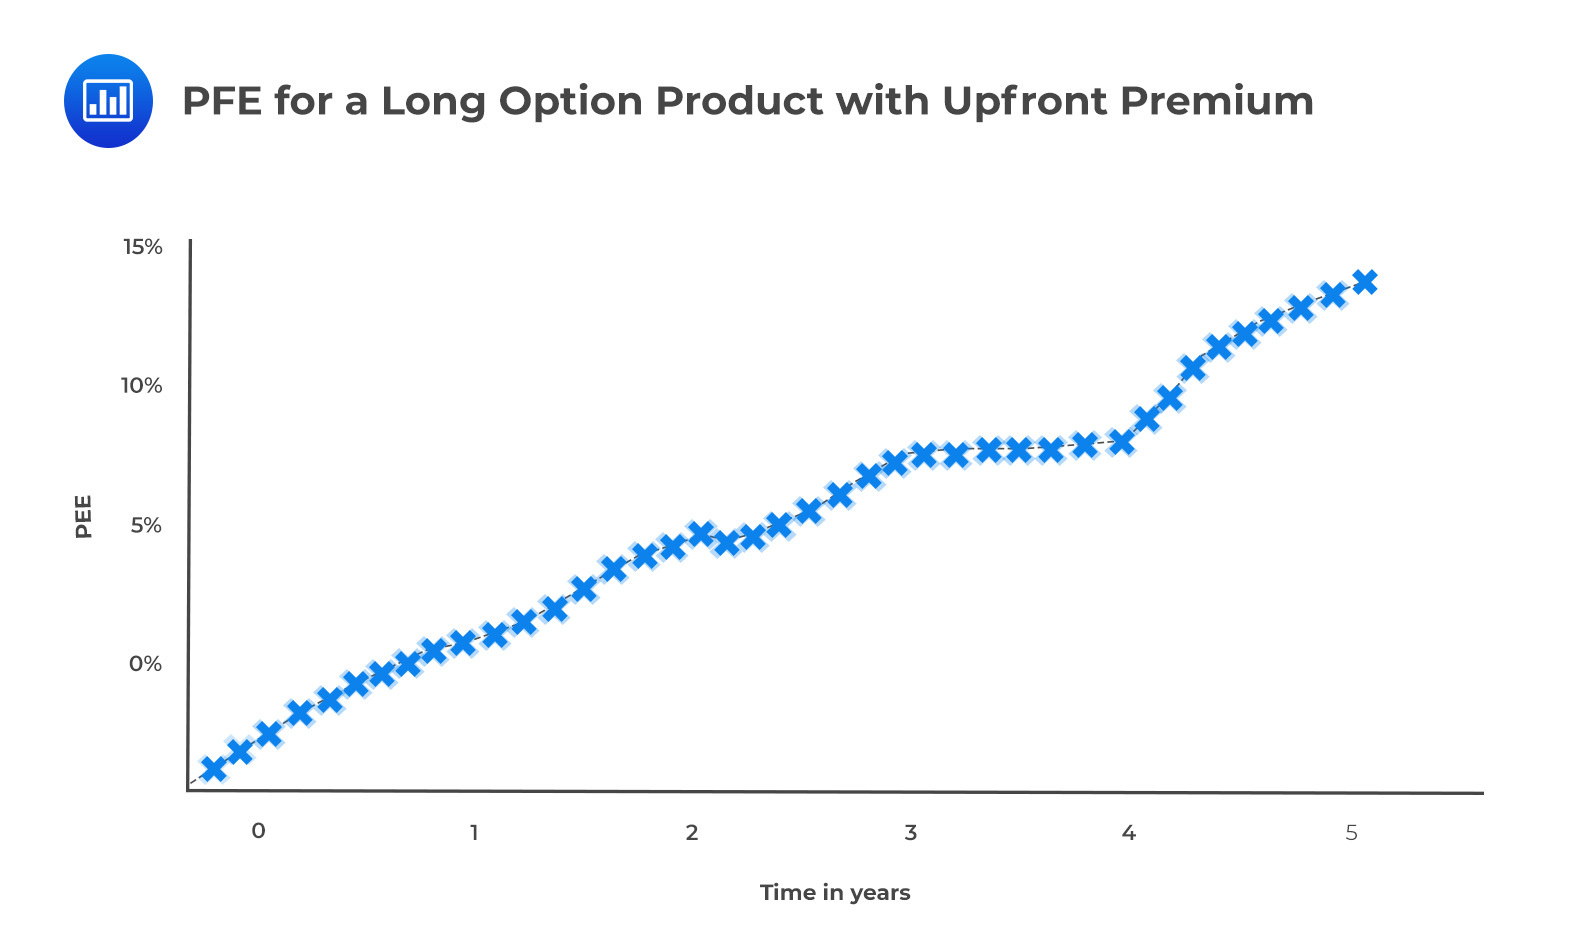 PFE for a Long Option Product with Upfront Premium